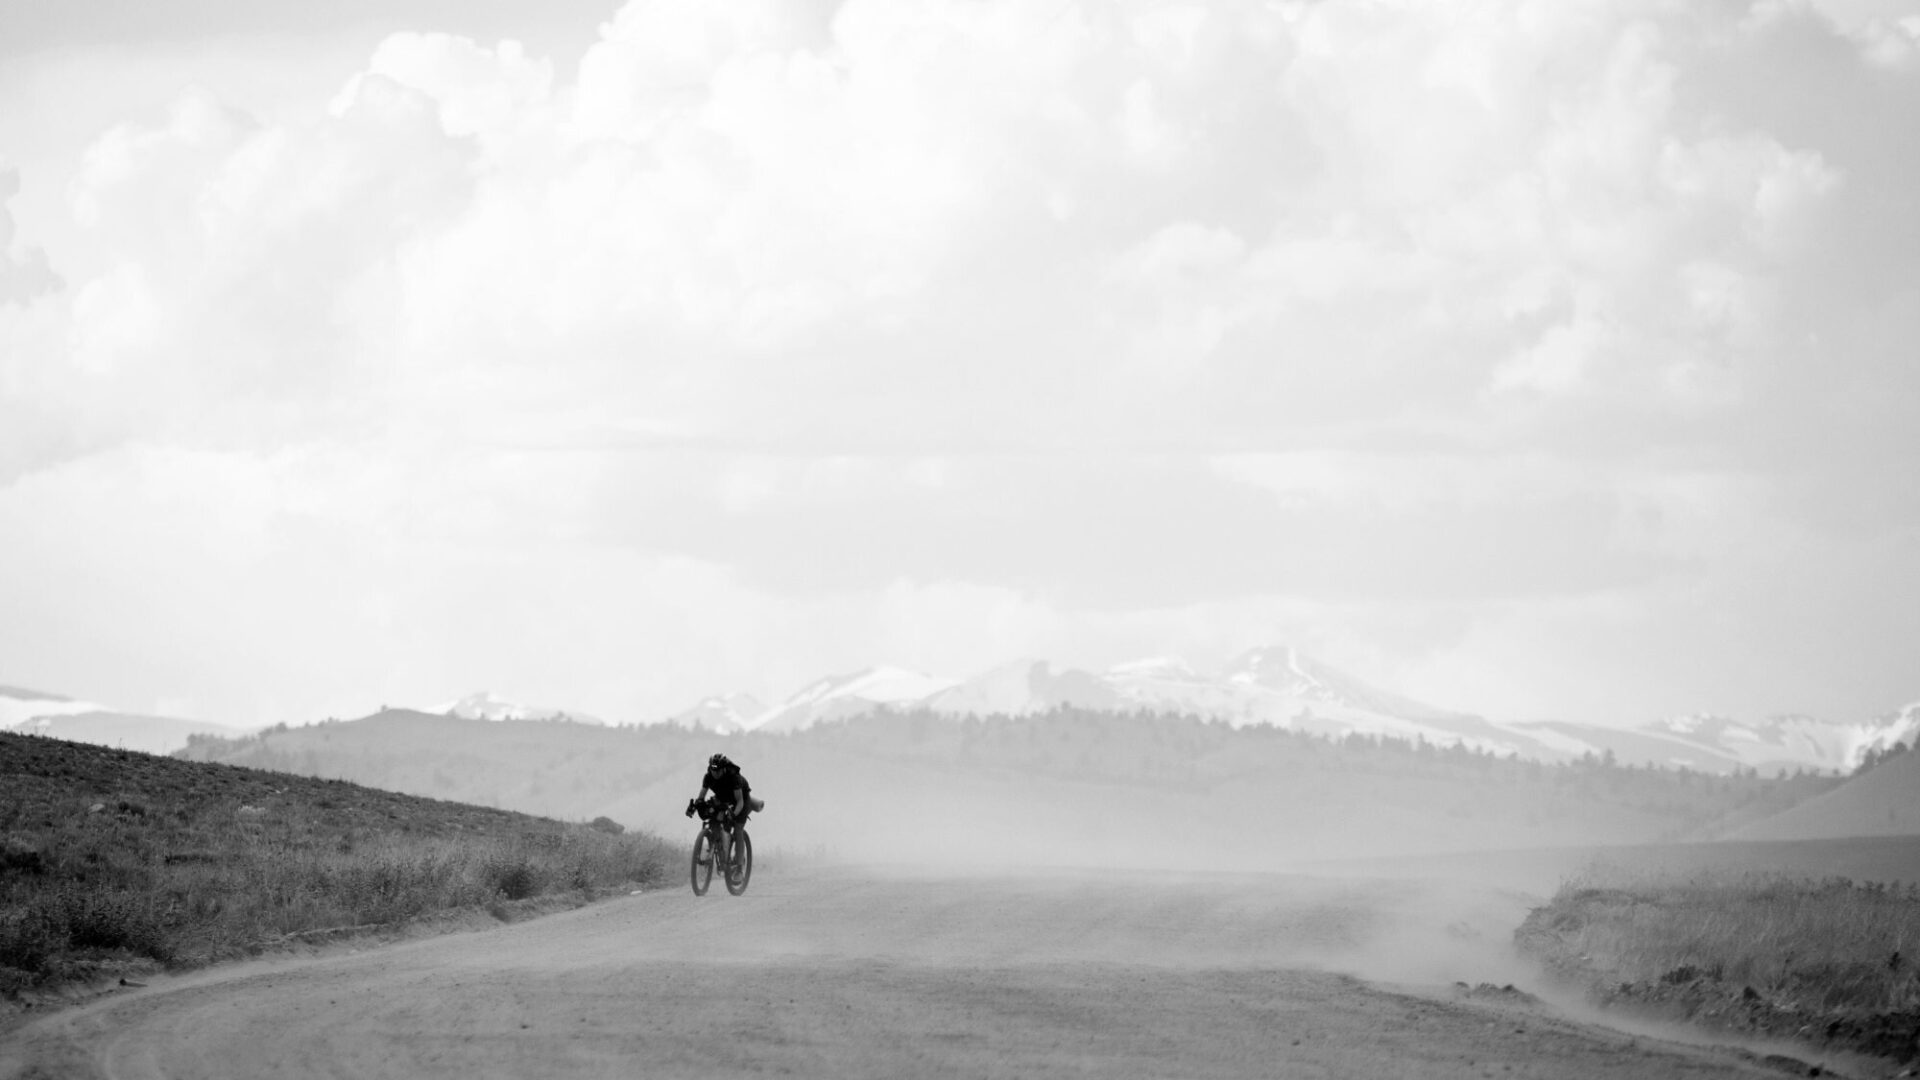 Lael Wilcox on the dusty backroads of the Wild West during the 2019 Tour Divide, a 2100 mile race down the spine of the American west, starting in Banff, Canada and ending in Antelope, New Mexico. © Rugile Kaladyte